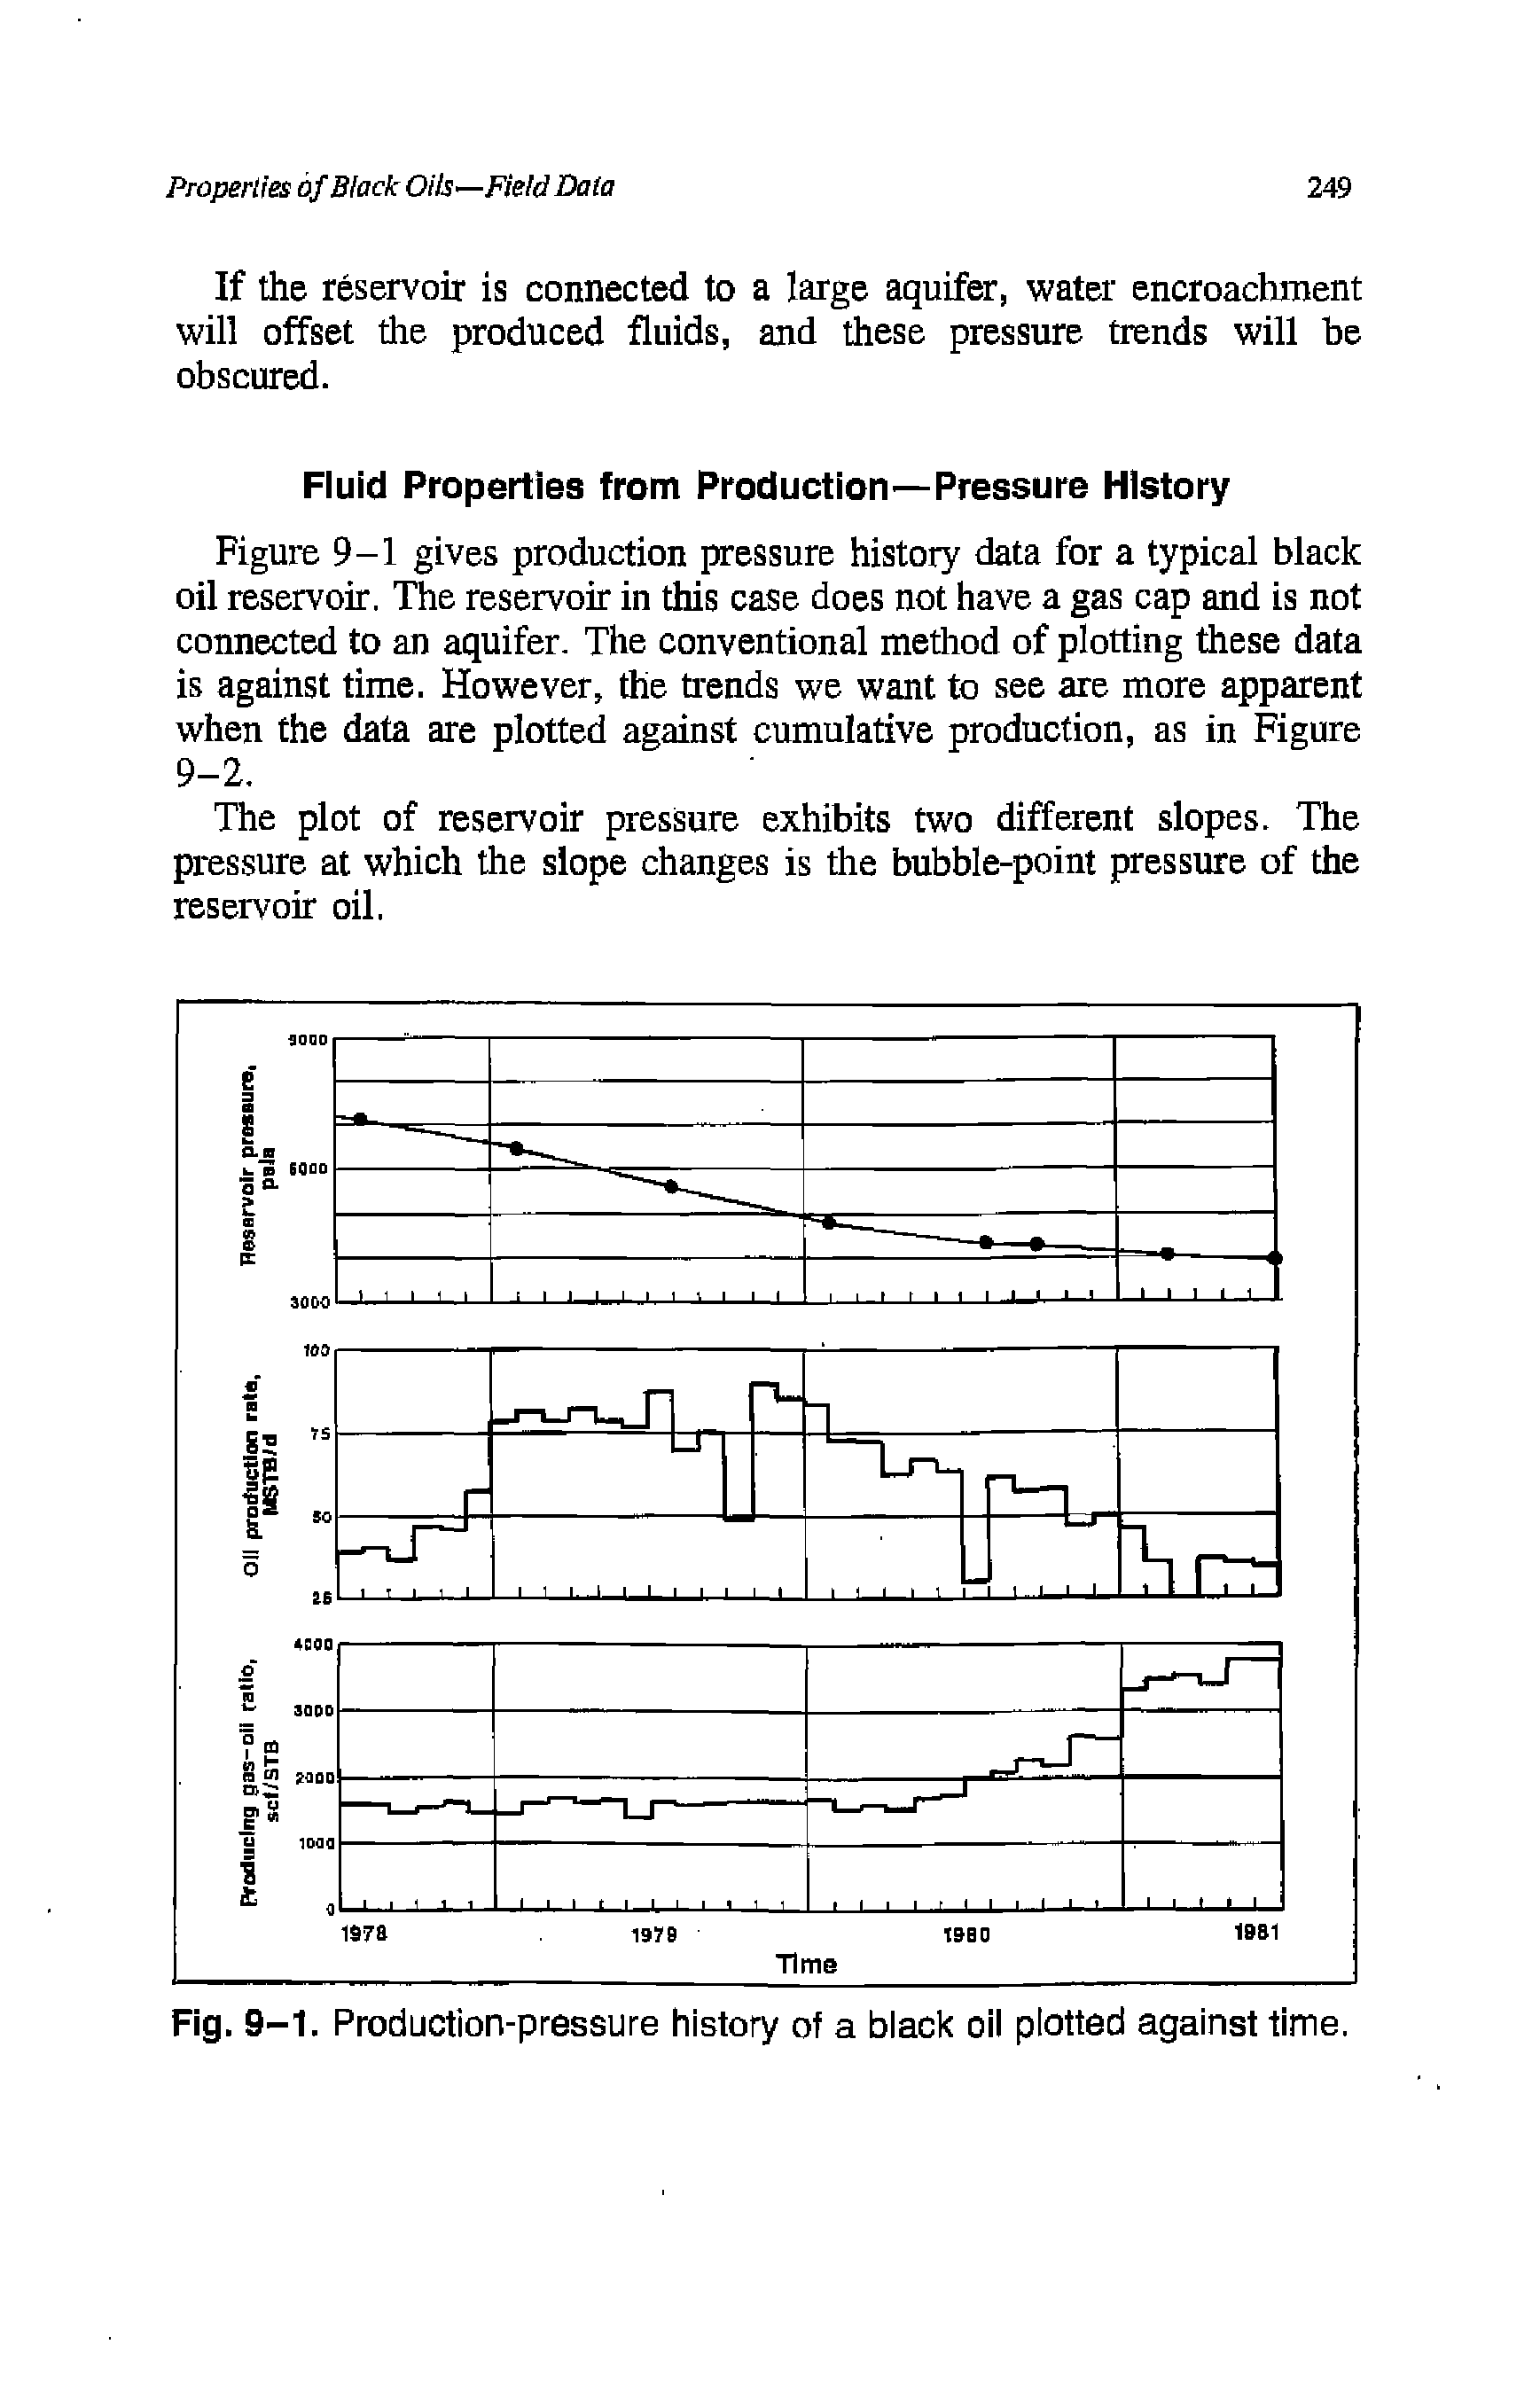 Fig. 9-1. Production-pressure history of a black oil plotted against time.